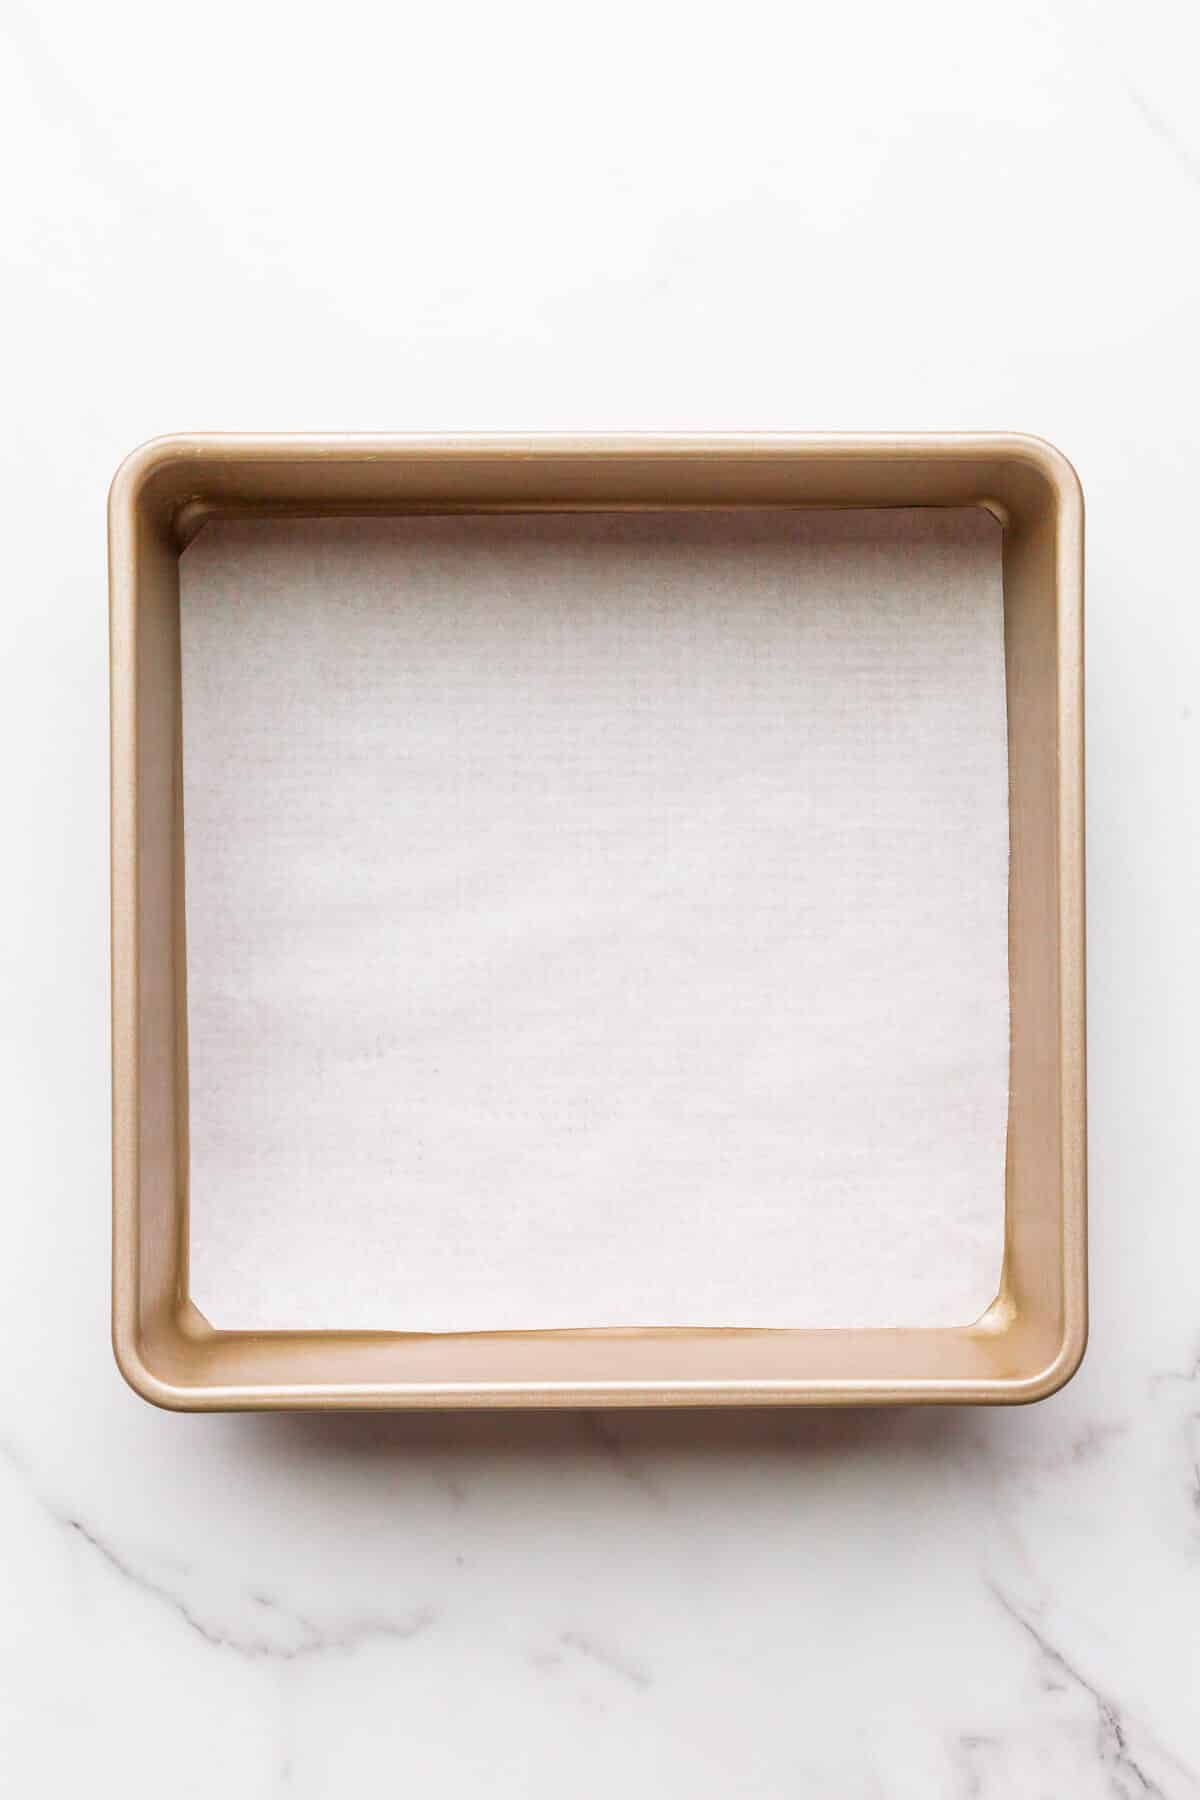 Buttered 9x9 square cake pan lined with a square of parchment paper fitted to the bottom of the pan to prevent cakes from sticking.